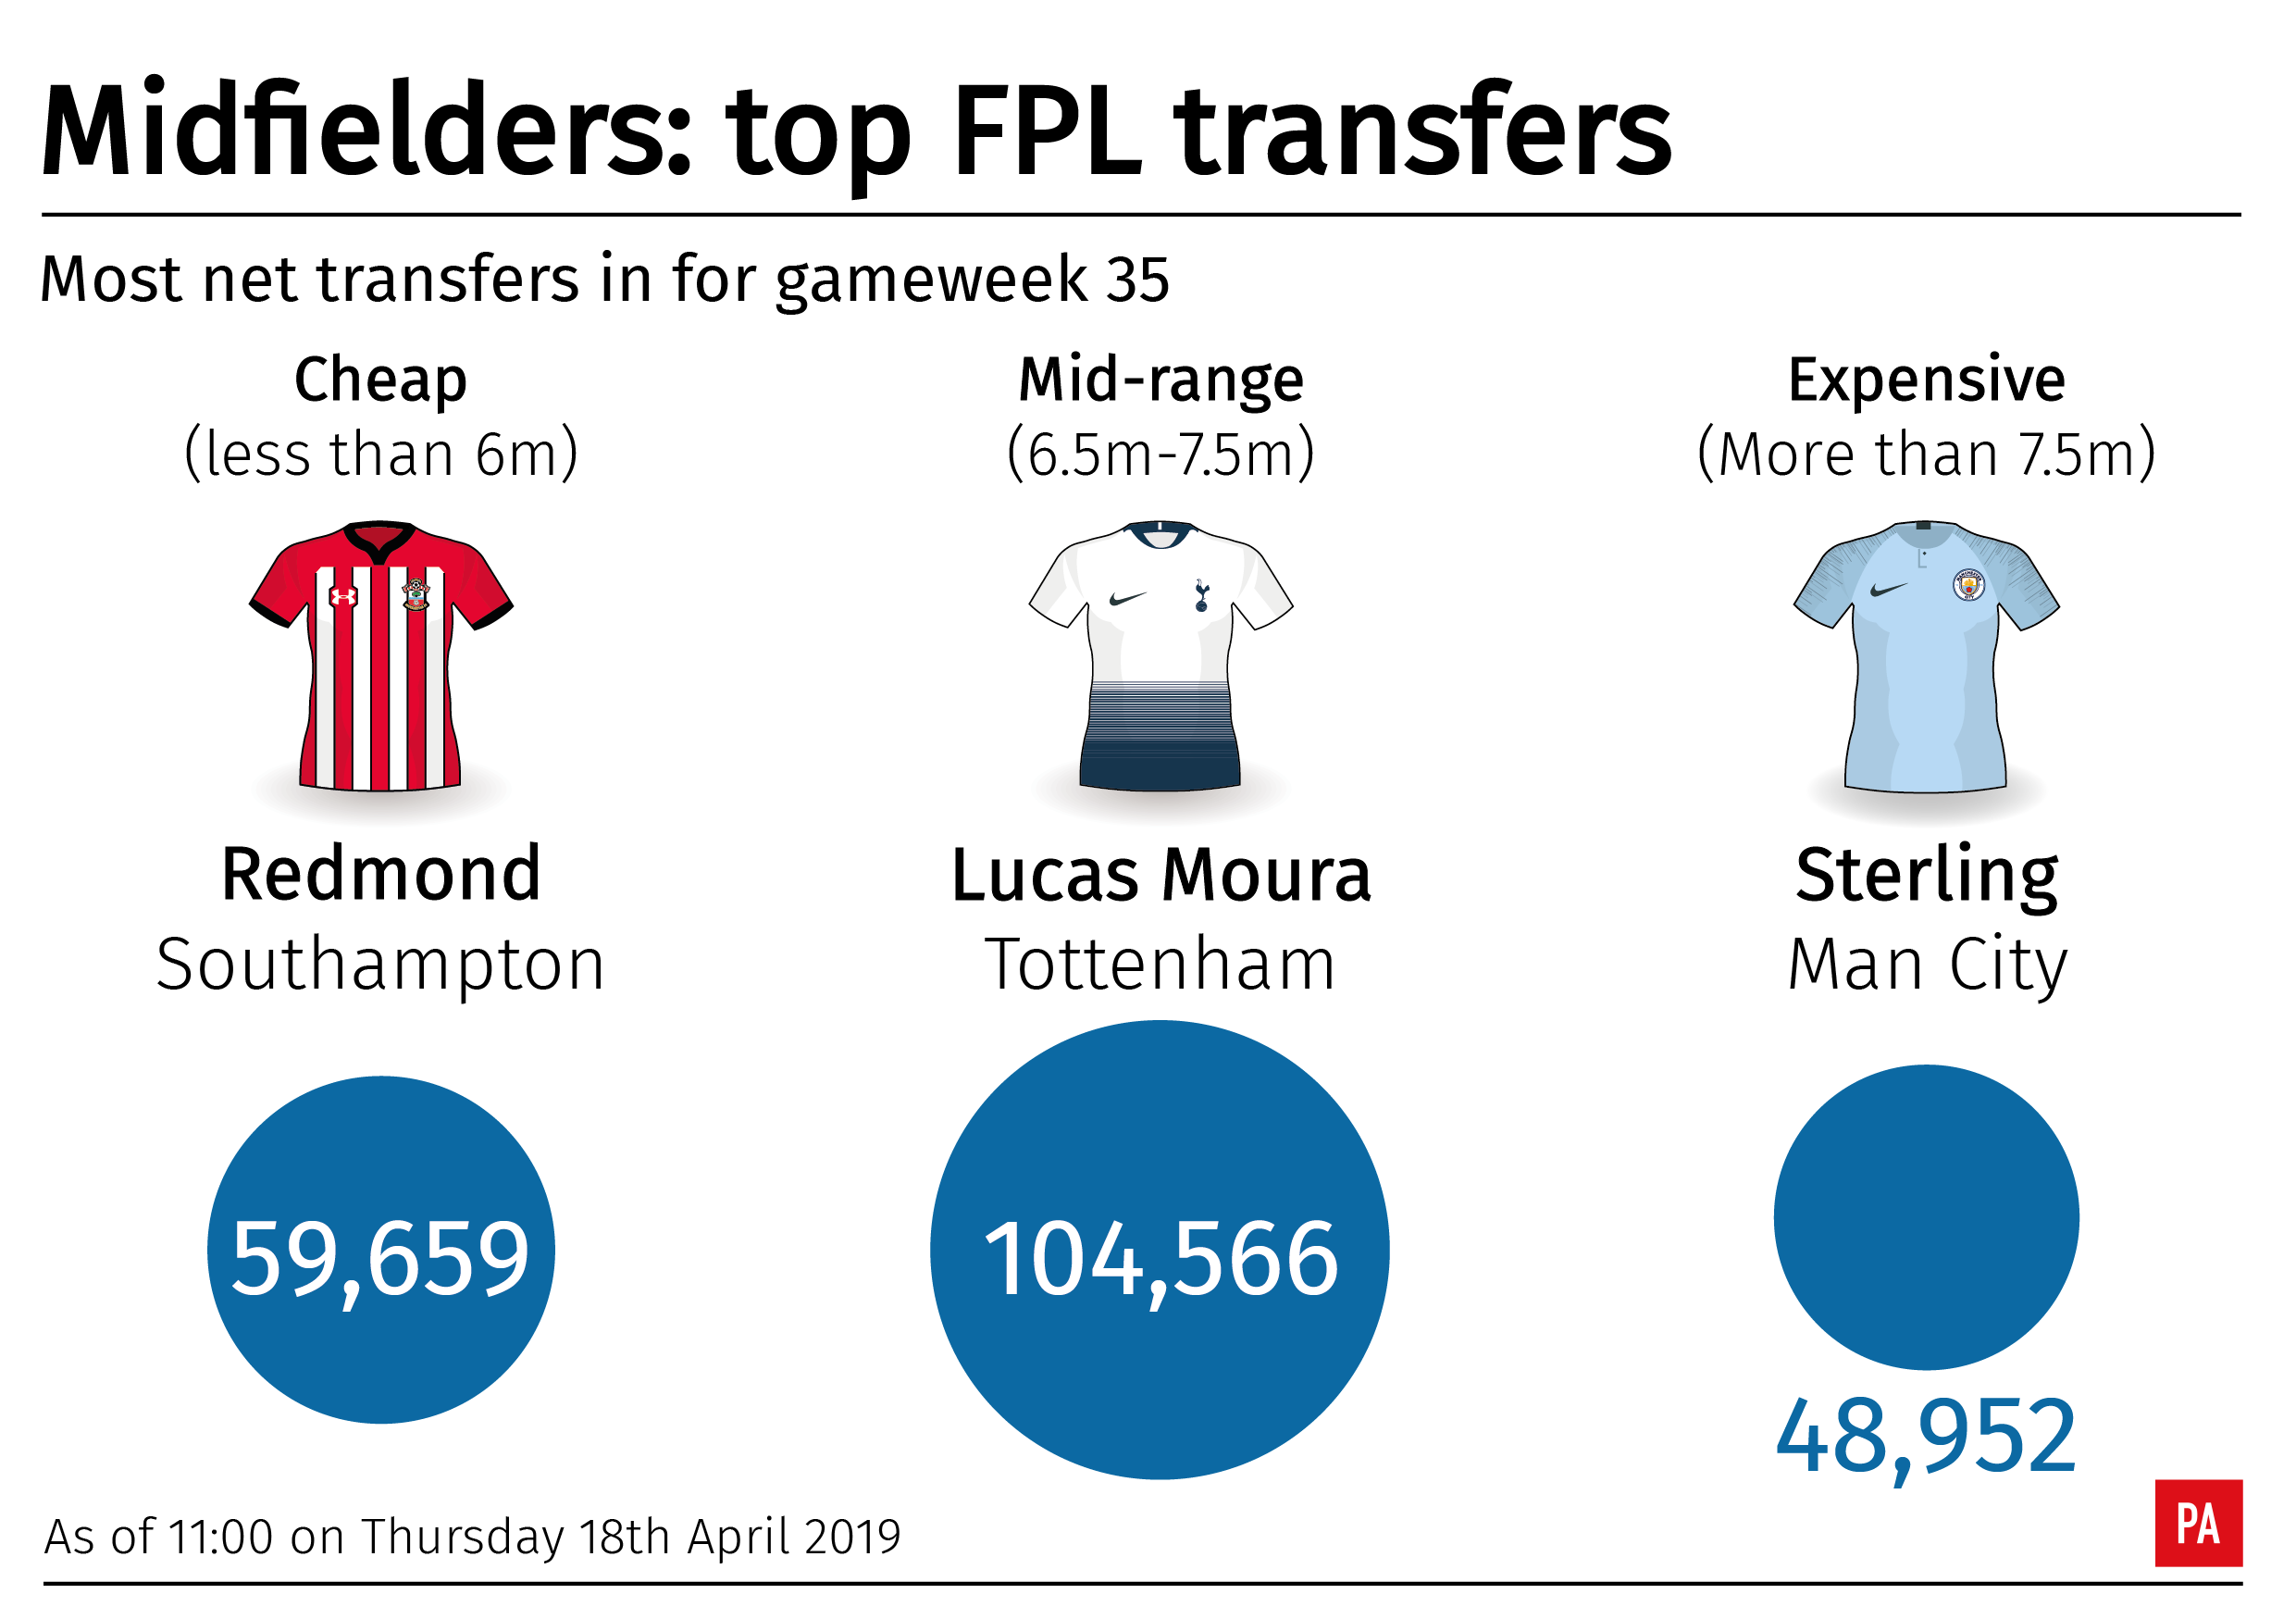 Three of the most popular midfielders for Fantasy Premier League managers ahead of gameweek 35